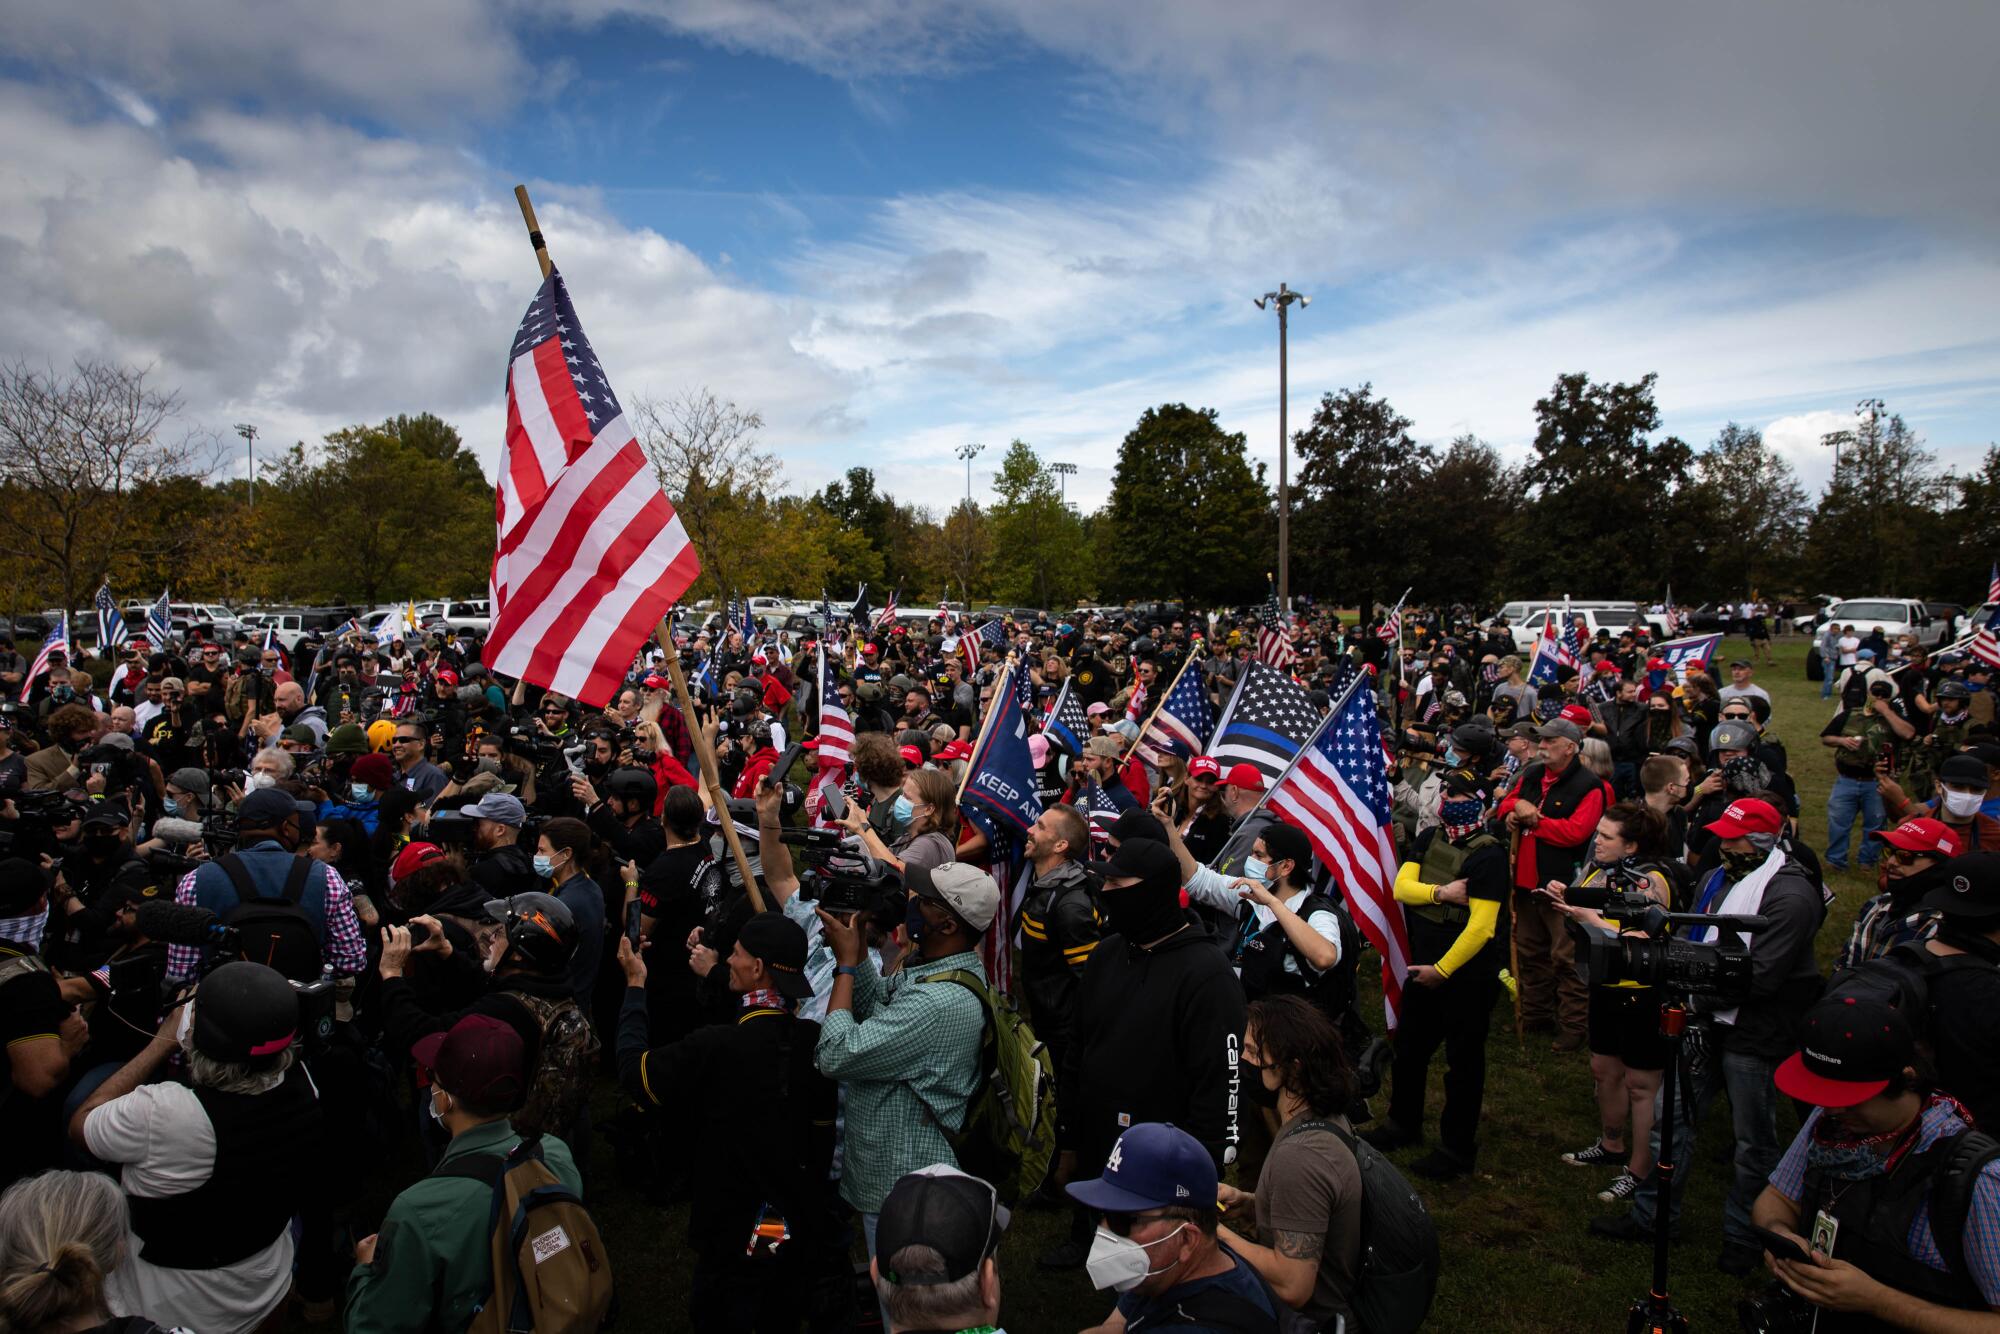 Several hundred members of the Proud Boys in a park raise U.S. and Trump flags